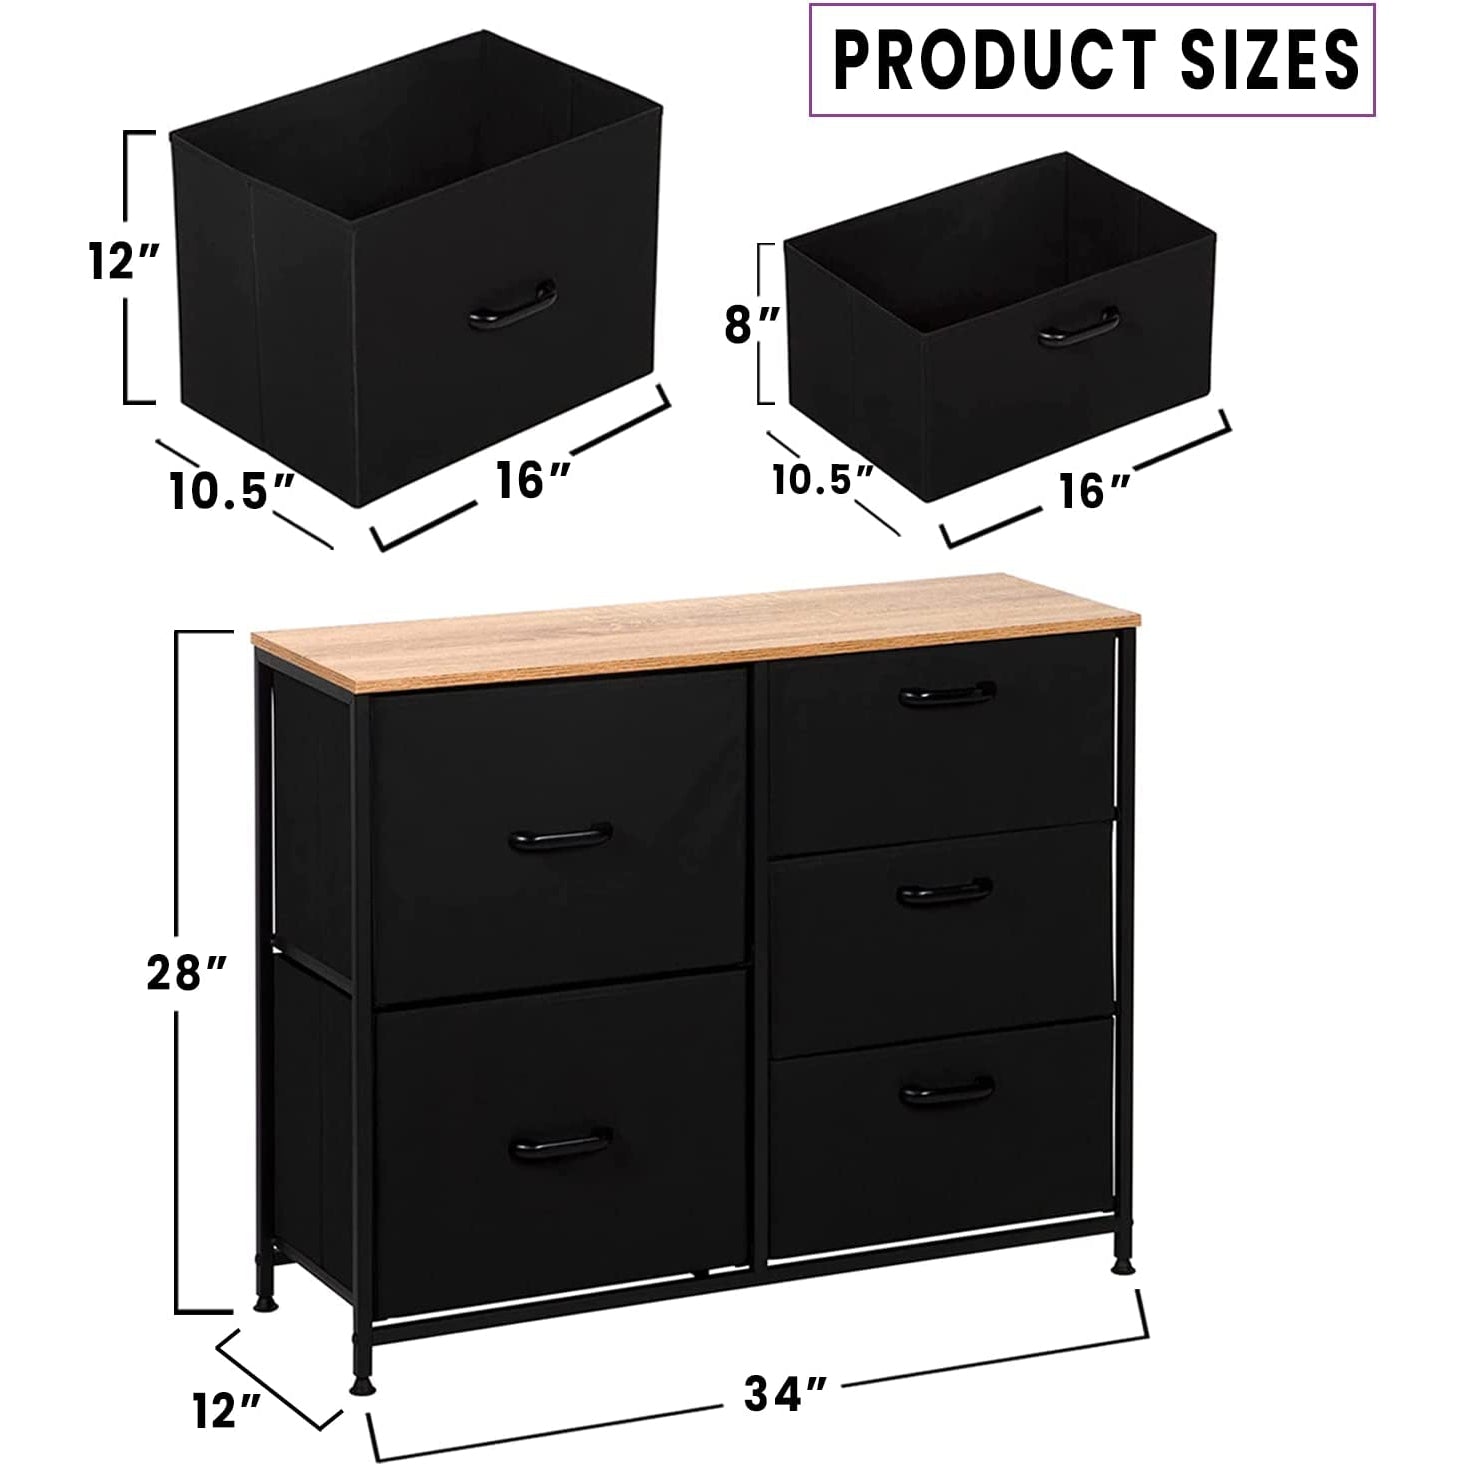 Fabric Dresser – 5 Drawers for Clothes, Toys, etc. – Durable Handles, 2 Big Drawers, 3 Smaller Clothes Drawers – Perfect for College Dorm Room, Home, Office, Nursery - Closet Dresser – Kids Dresser